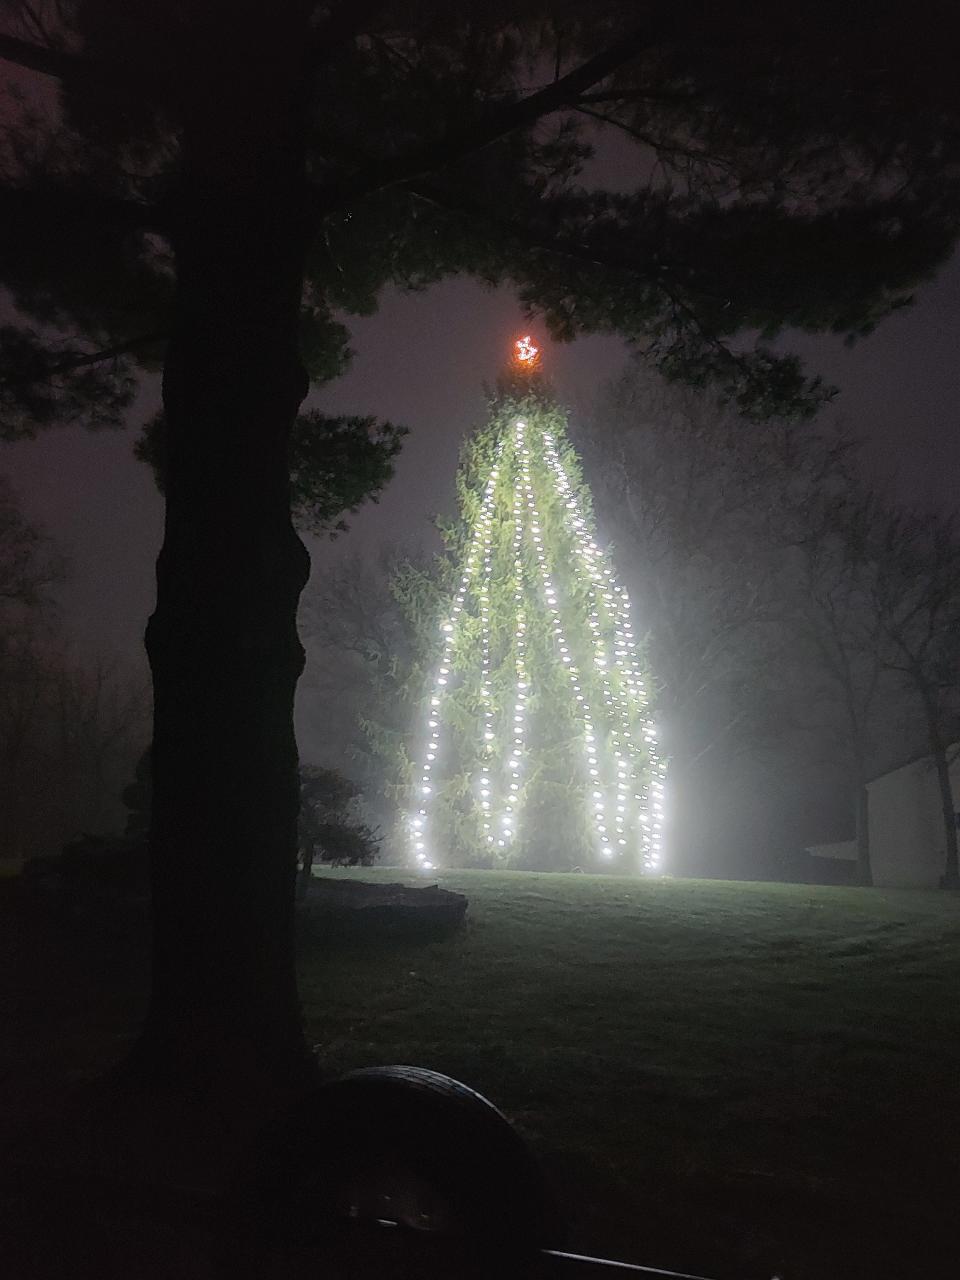 Greg and Karen Raney used a pulley system to raise strands of lights on a Norway spruce at their home on Route 997 near Waynesboro. The couple moved to the area from Texas three years ago and hope the tree that can be seen for miles brings joy to people in their new hometown.